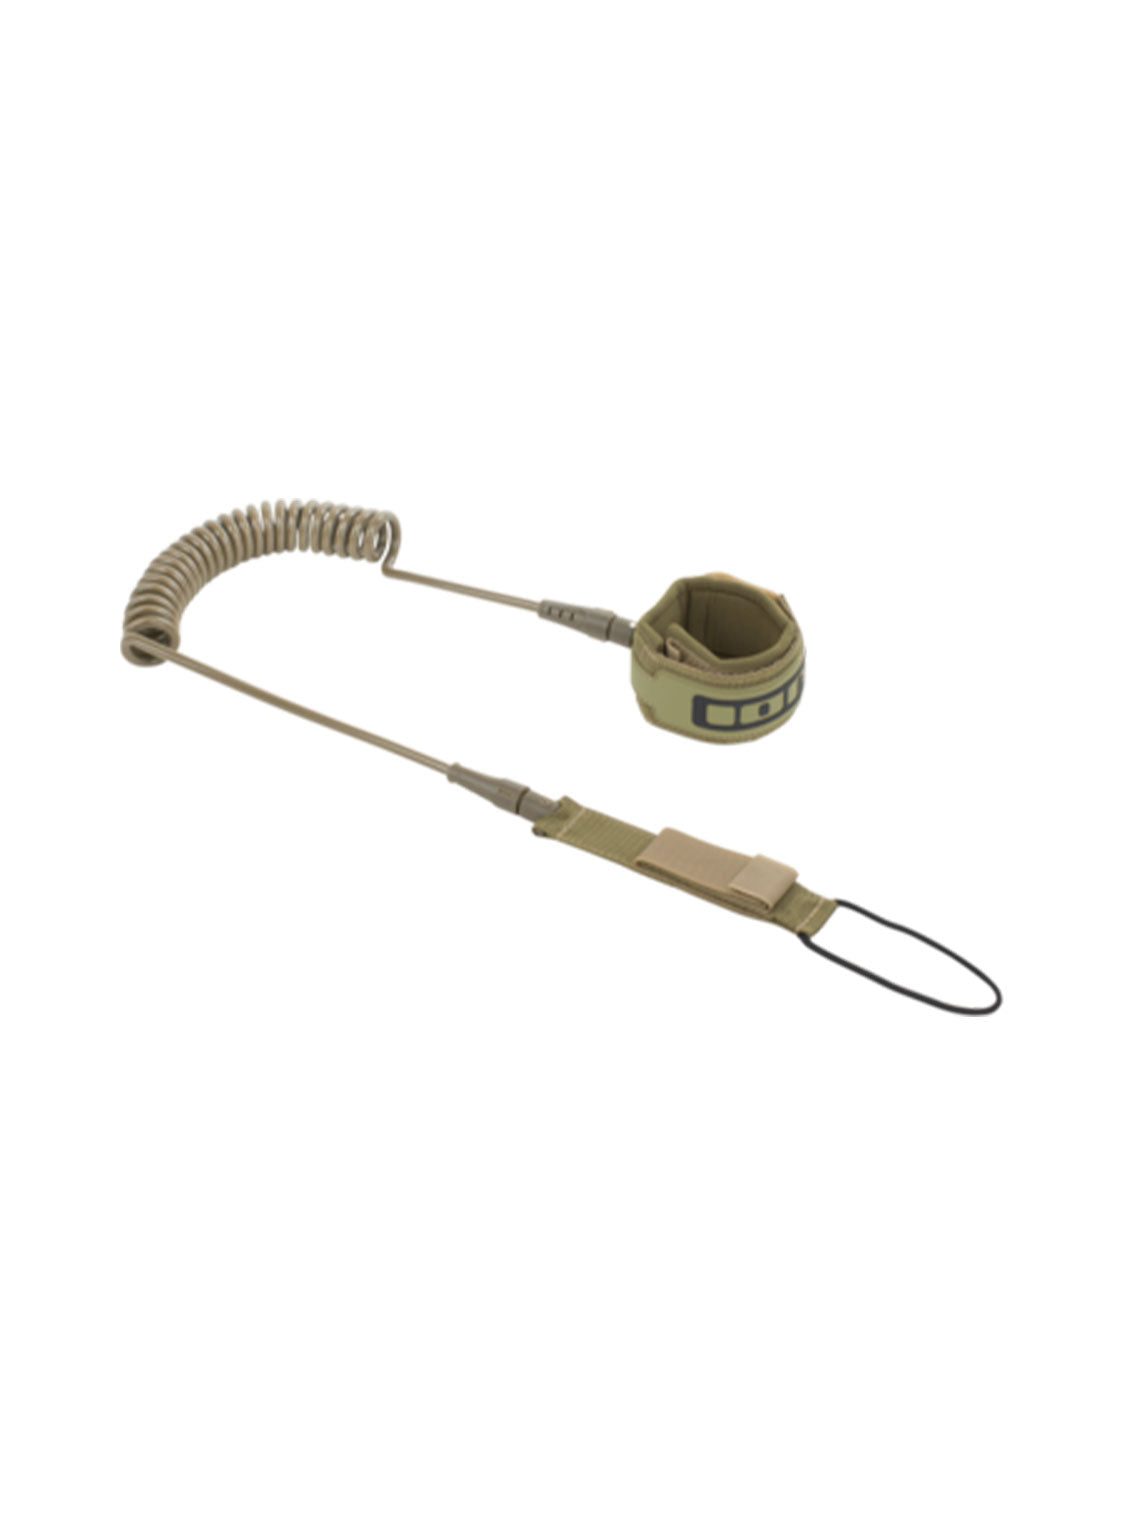 SUP Core Leash ION 2020 - coiled - olive - 10'